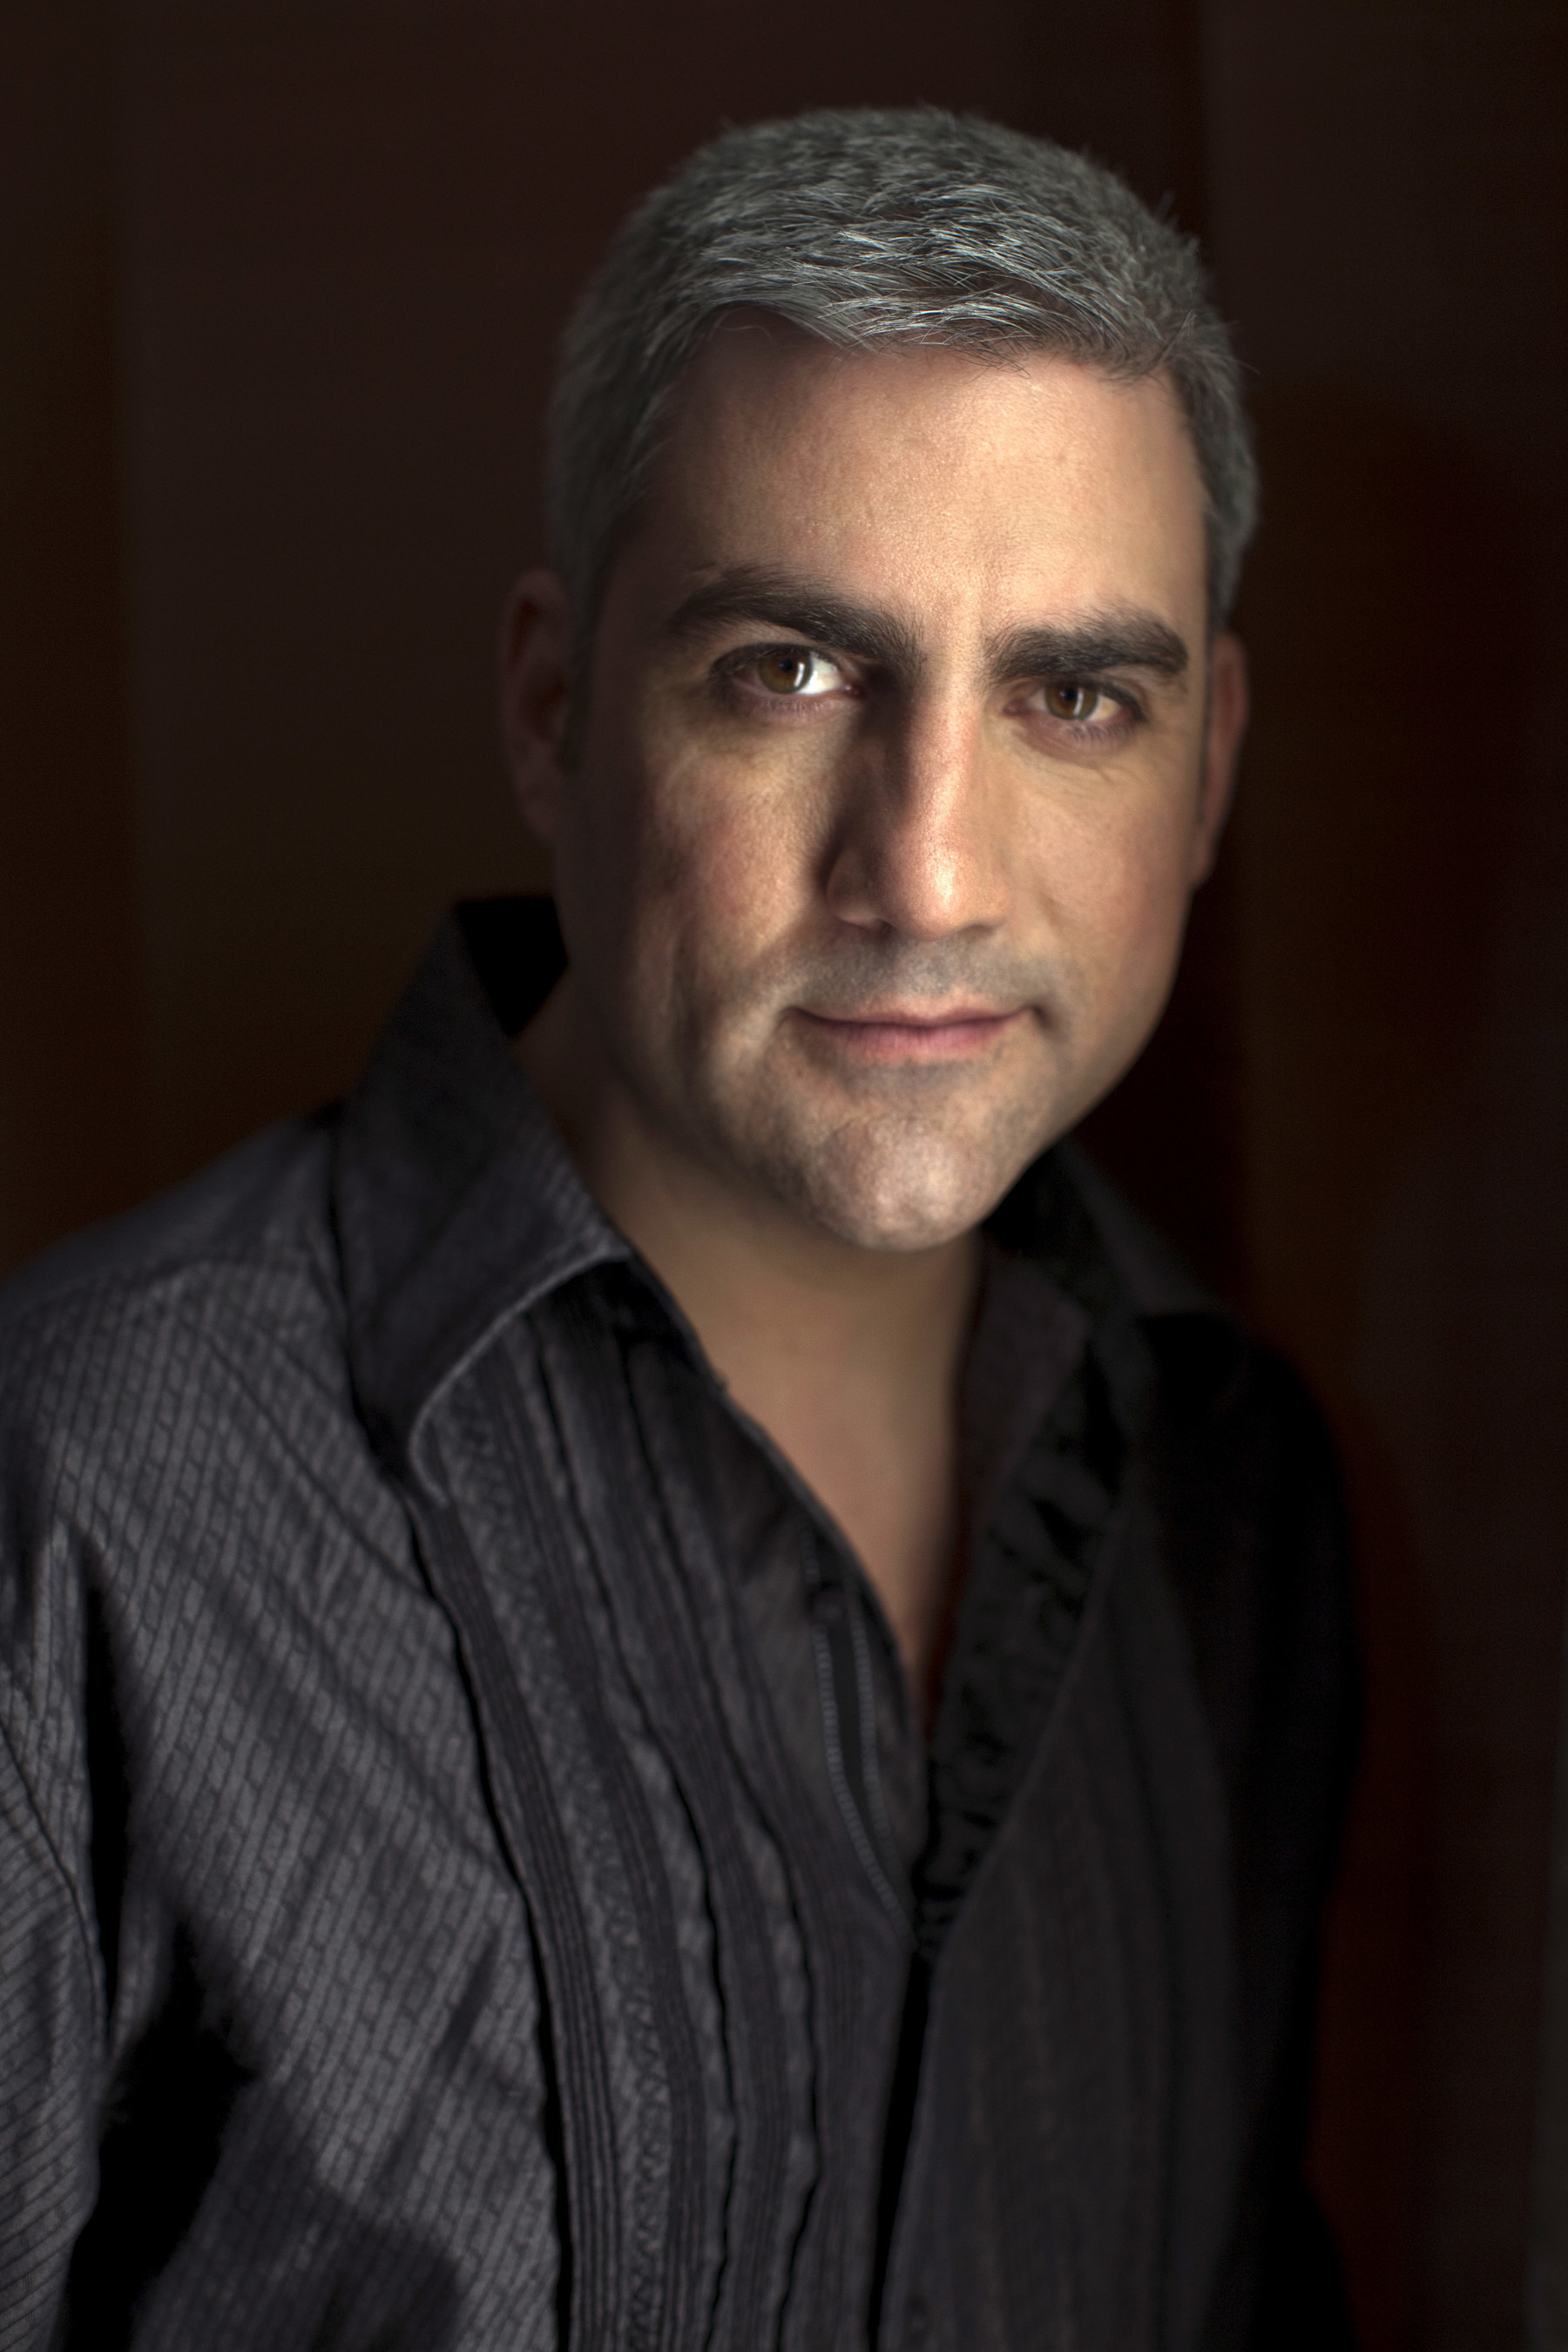 ​Taylor Hicks, winner of American Idol season 5, to perform at 5th Annual Tribute to Champions of Hope